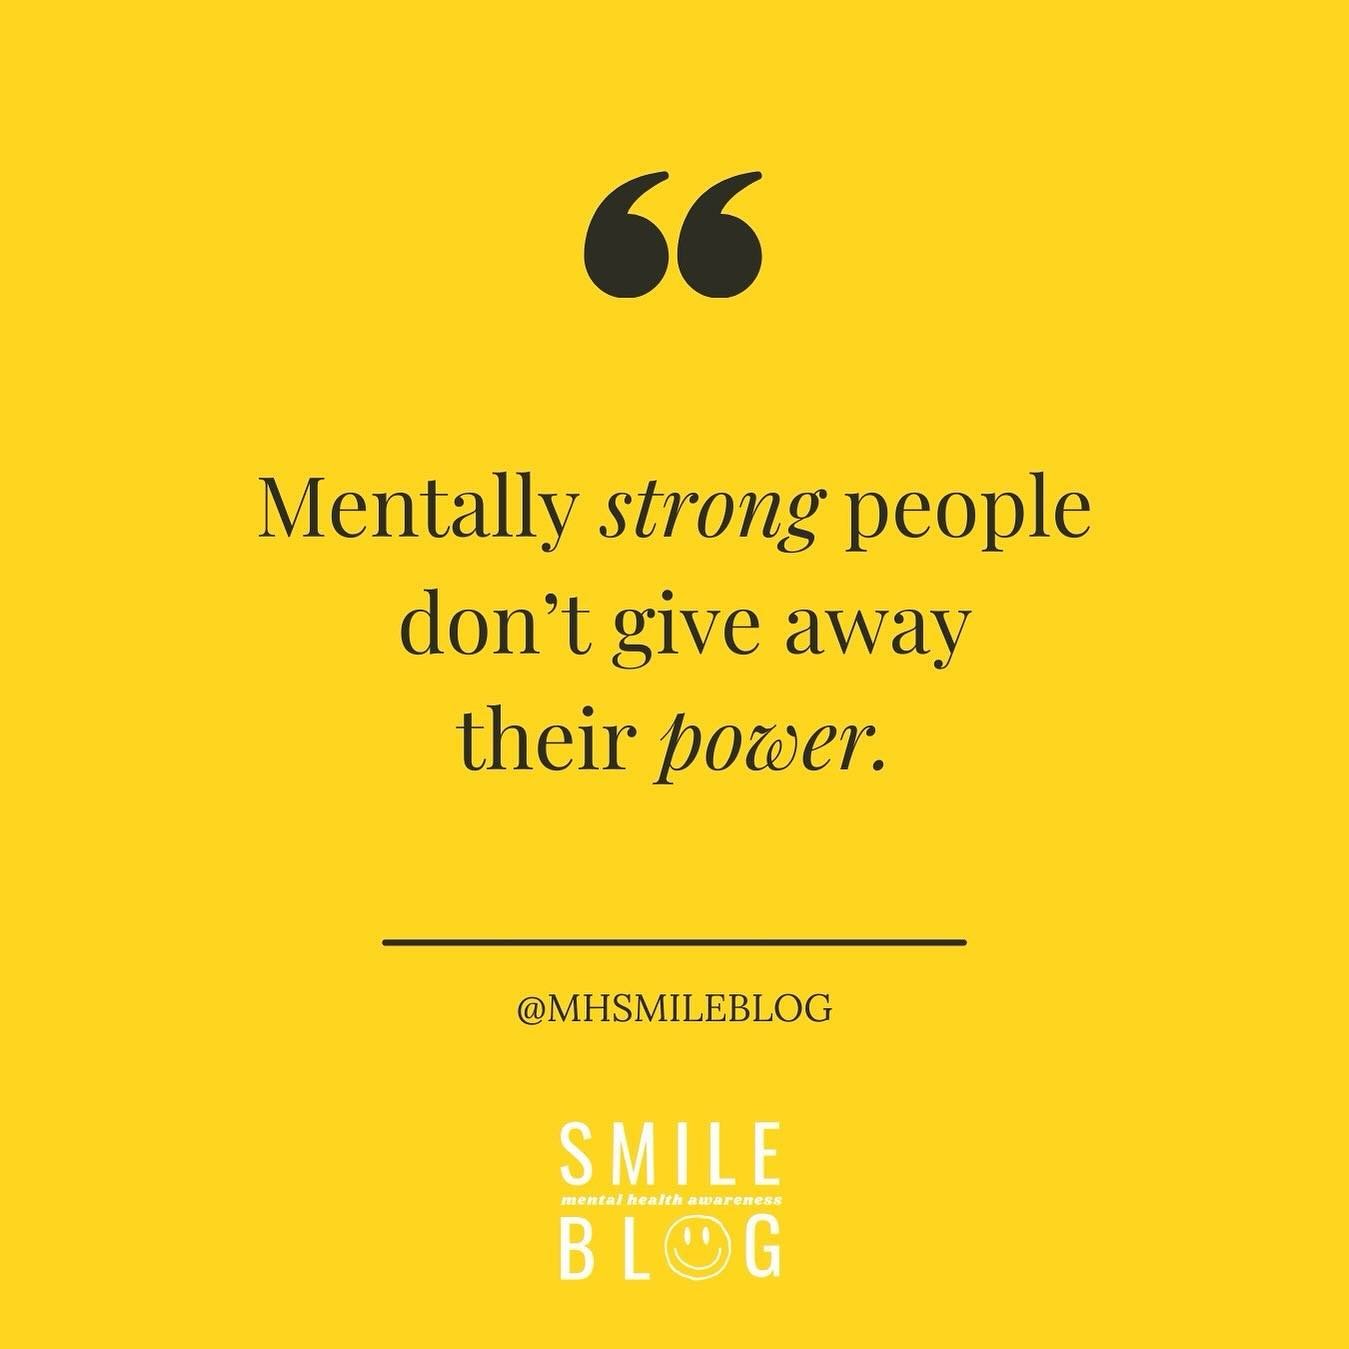 Don&rsquo;t let negative thoughts or energy take up space in your brain. If you let it consume you, you are giving away your power. 

Have a great day⚡️🩵😁 
.
.
.
.
.
Want to learn more about us? Check us out @ mhsmileblog.com. Link is in bio

#self